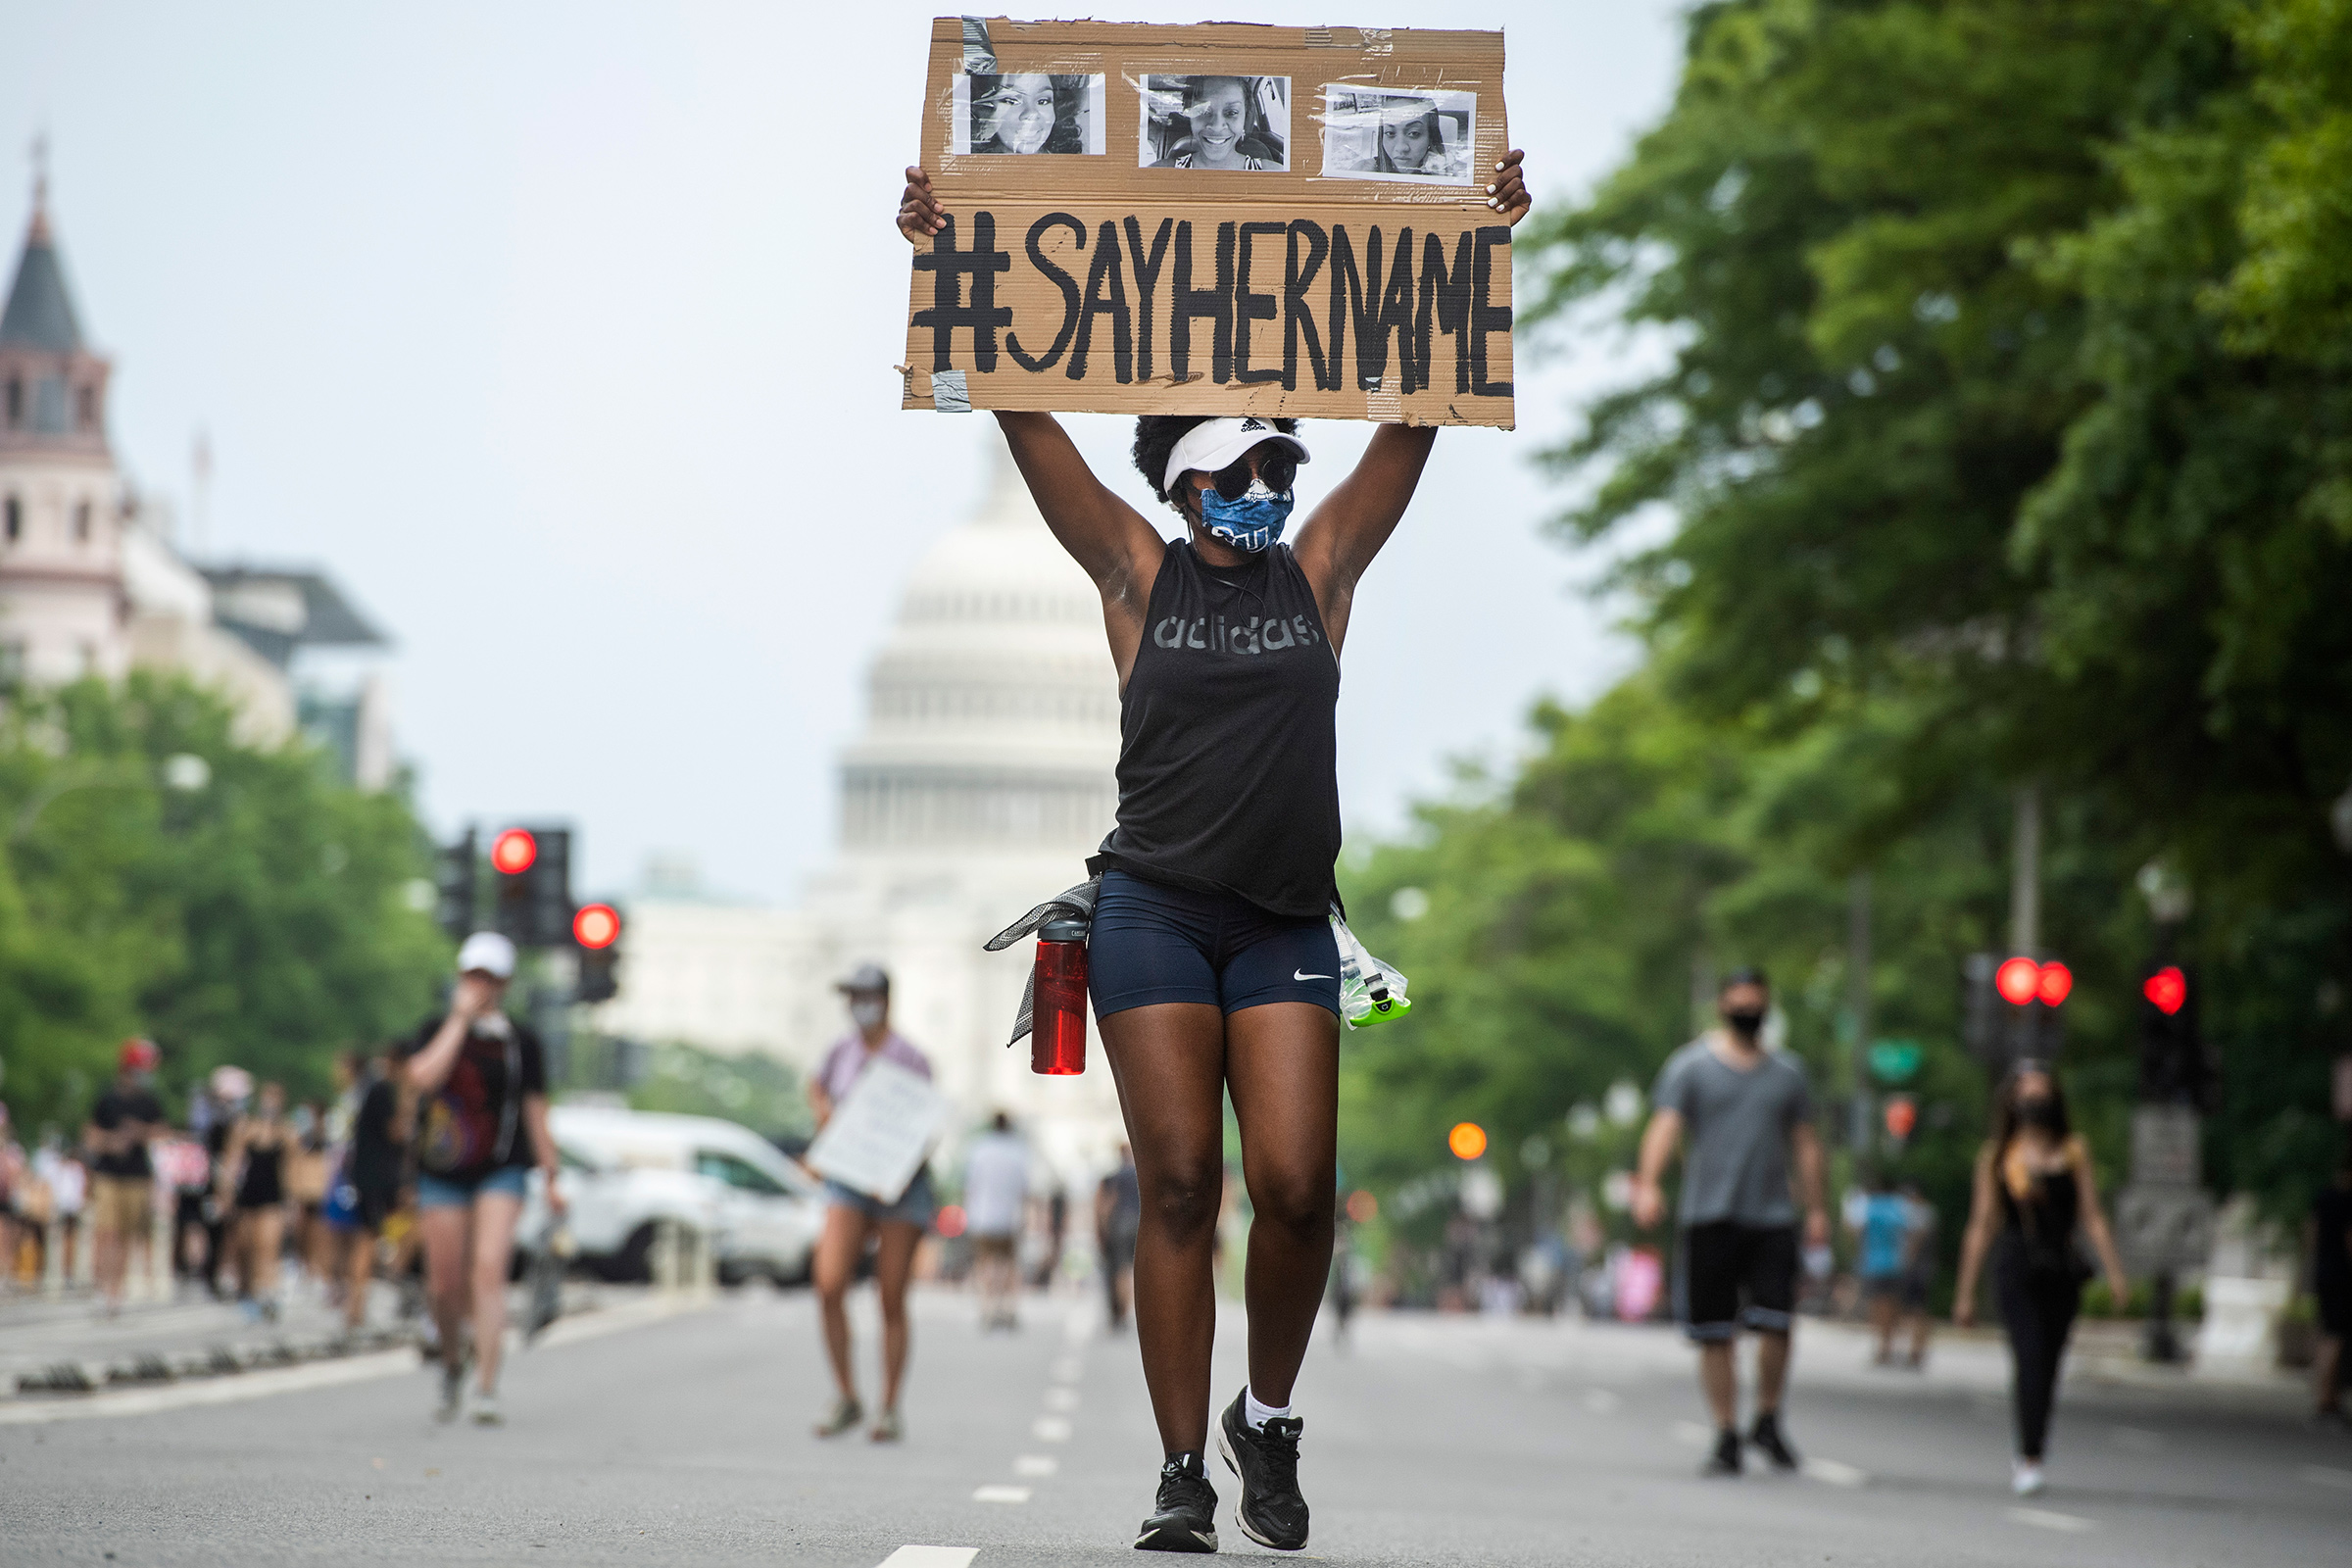 A demonstrator marches on Pennsylvania Avenue in Washington, D.C., on June 6, 2020.